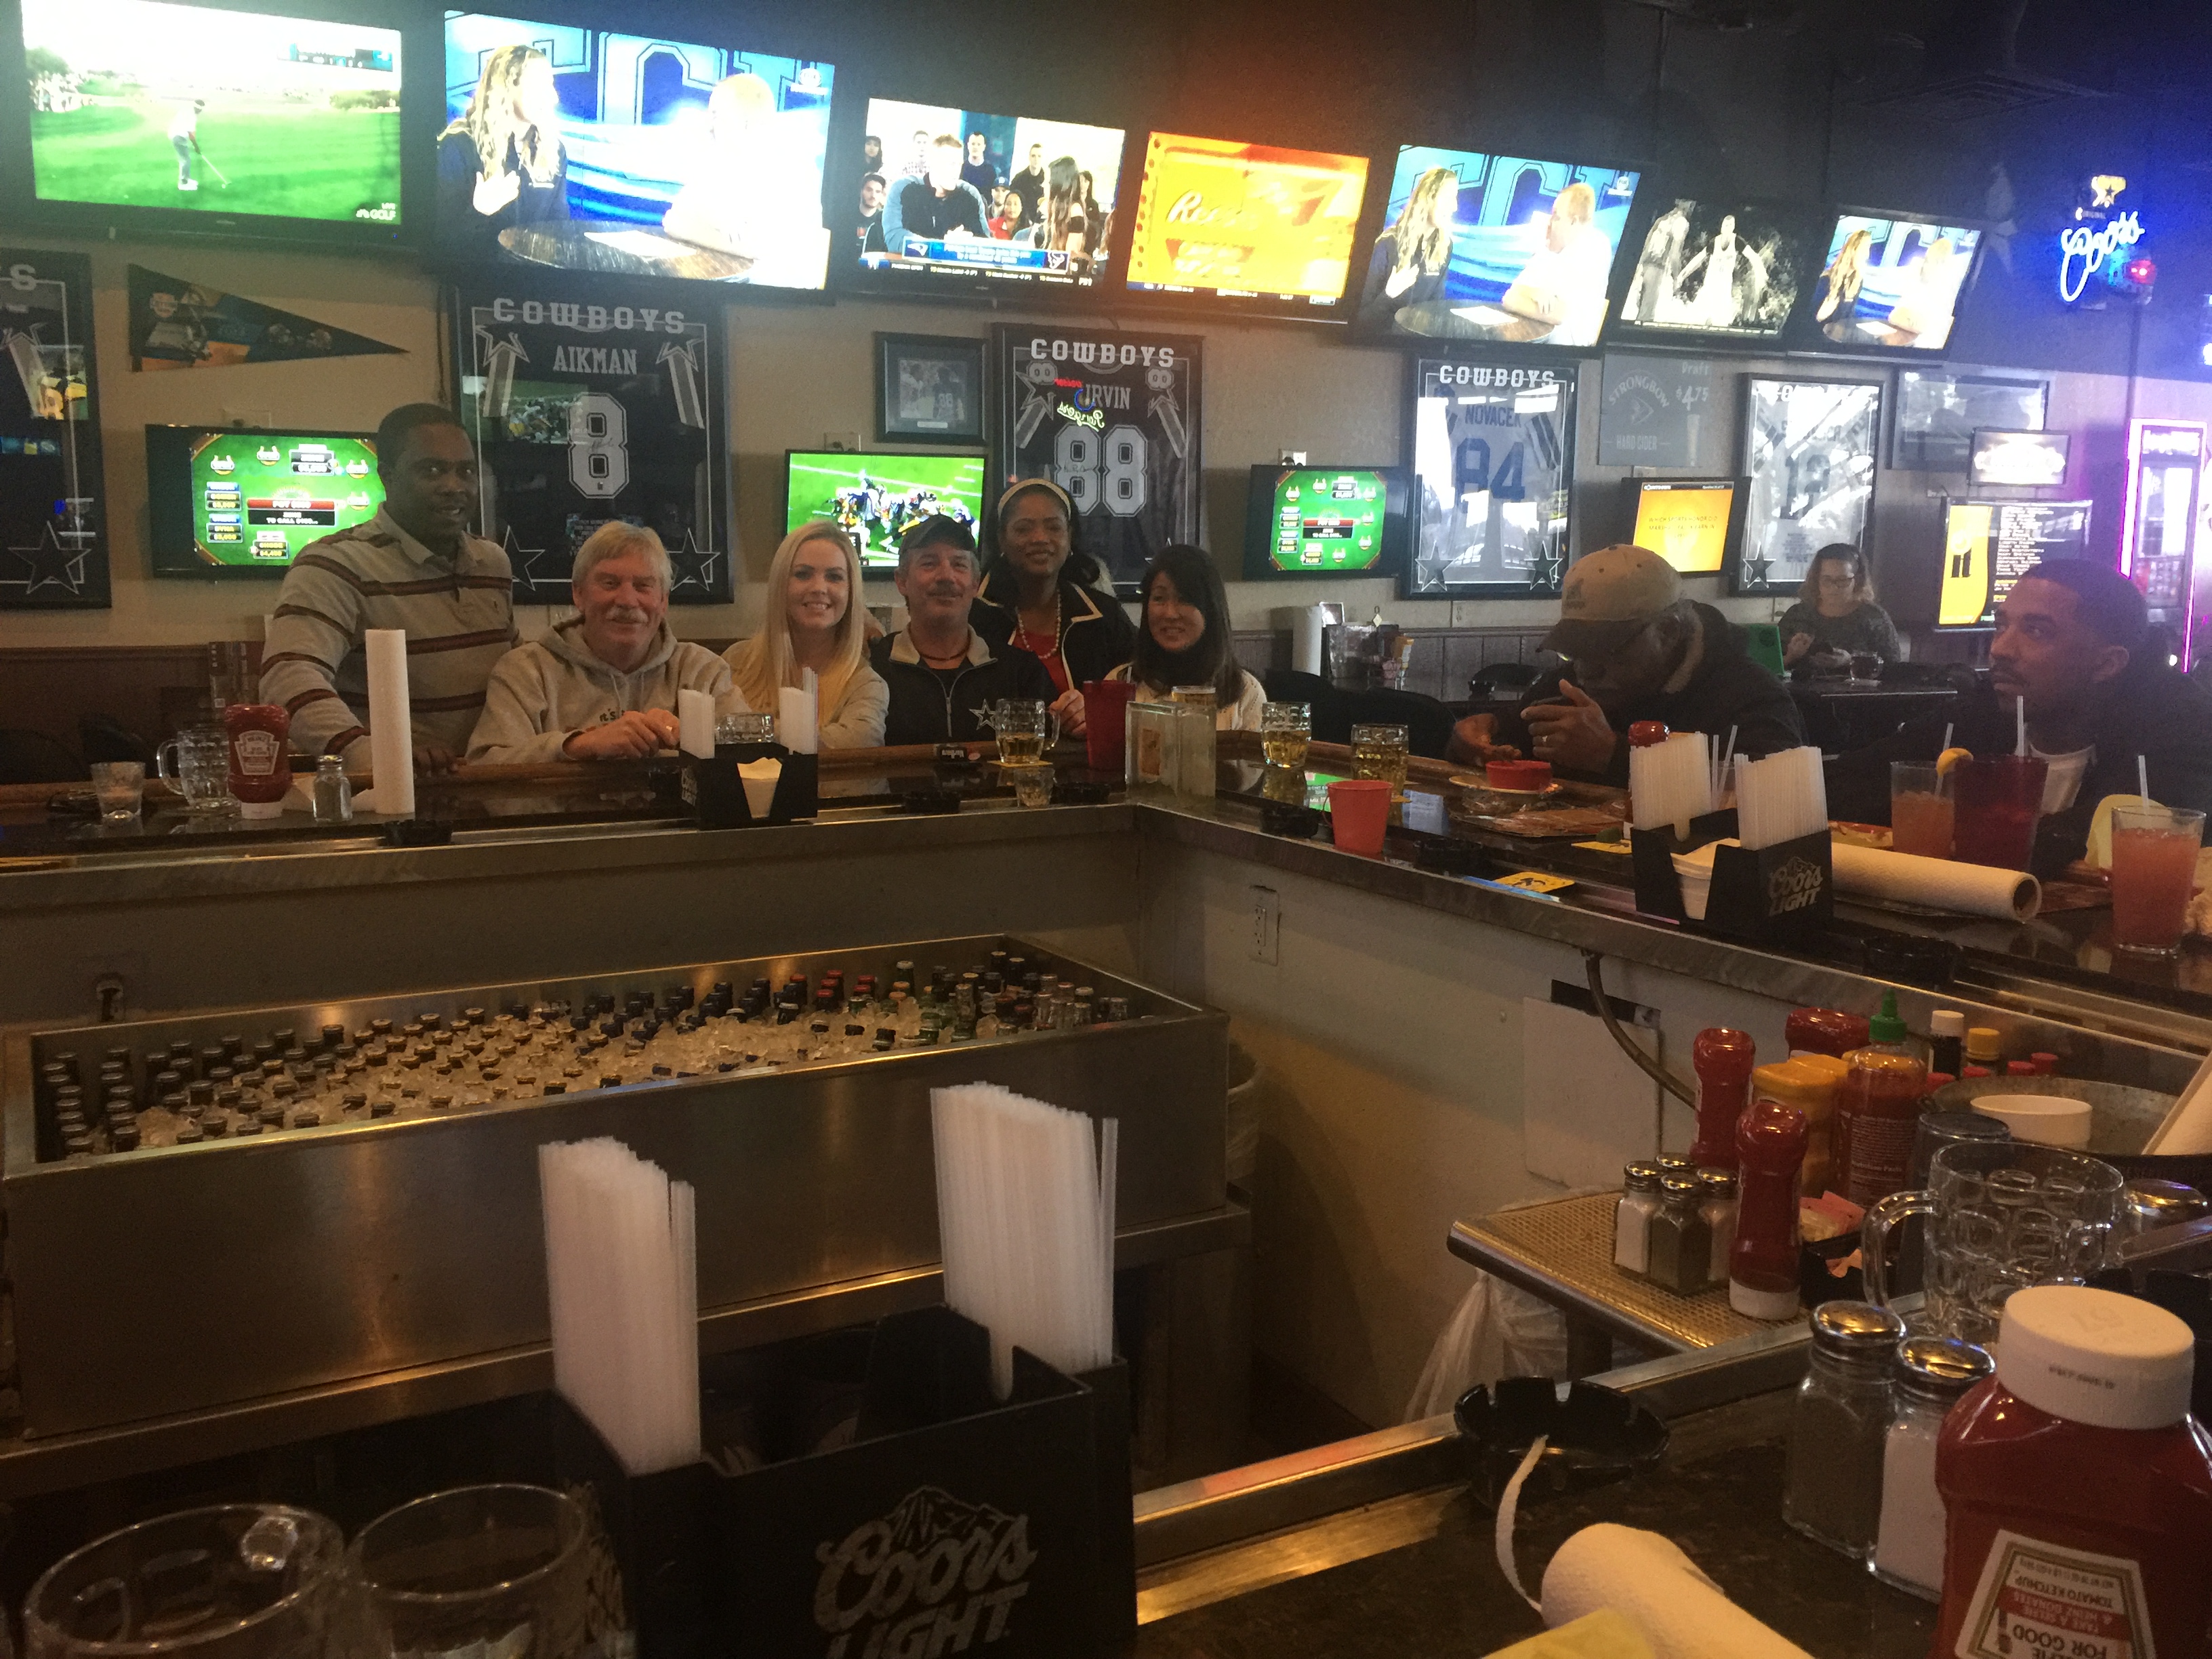 Can a Racialist regime break the bond? Photo caption: A multiracial, multicultural group of Americans at No Frills Grill & Sports Bar in Fort Worth, Texas , February 3, 2017